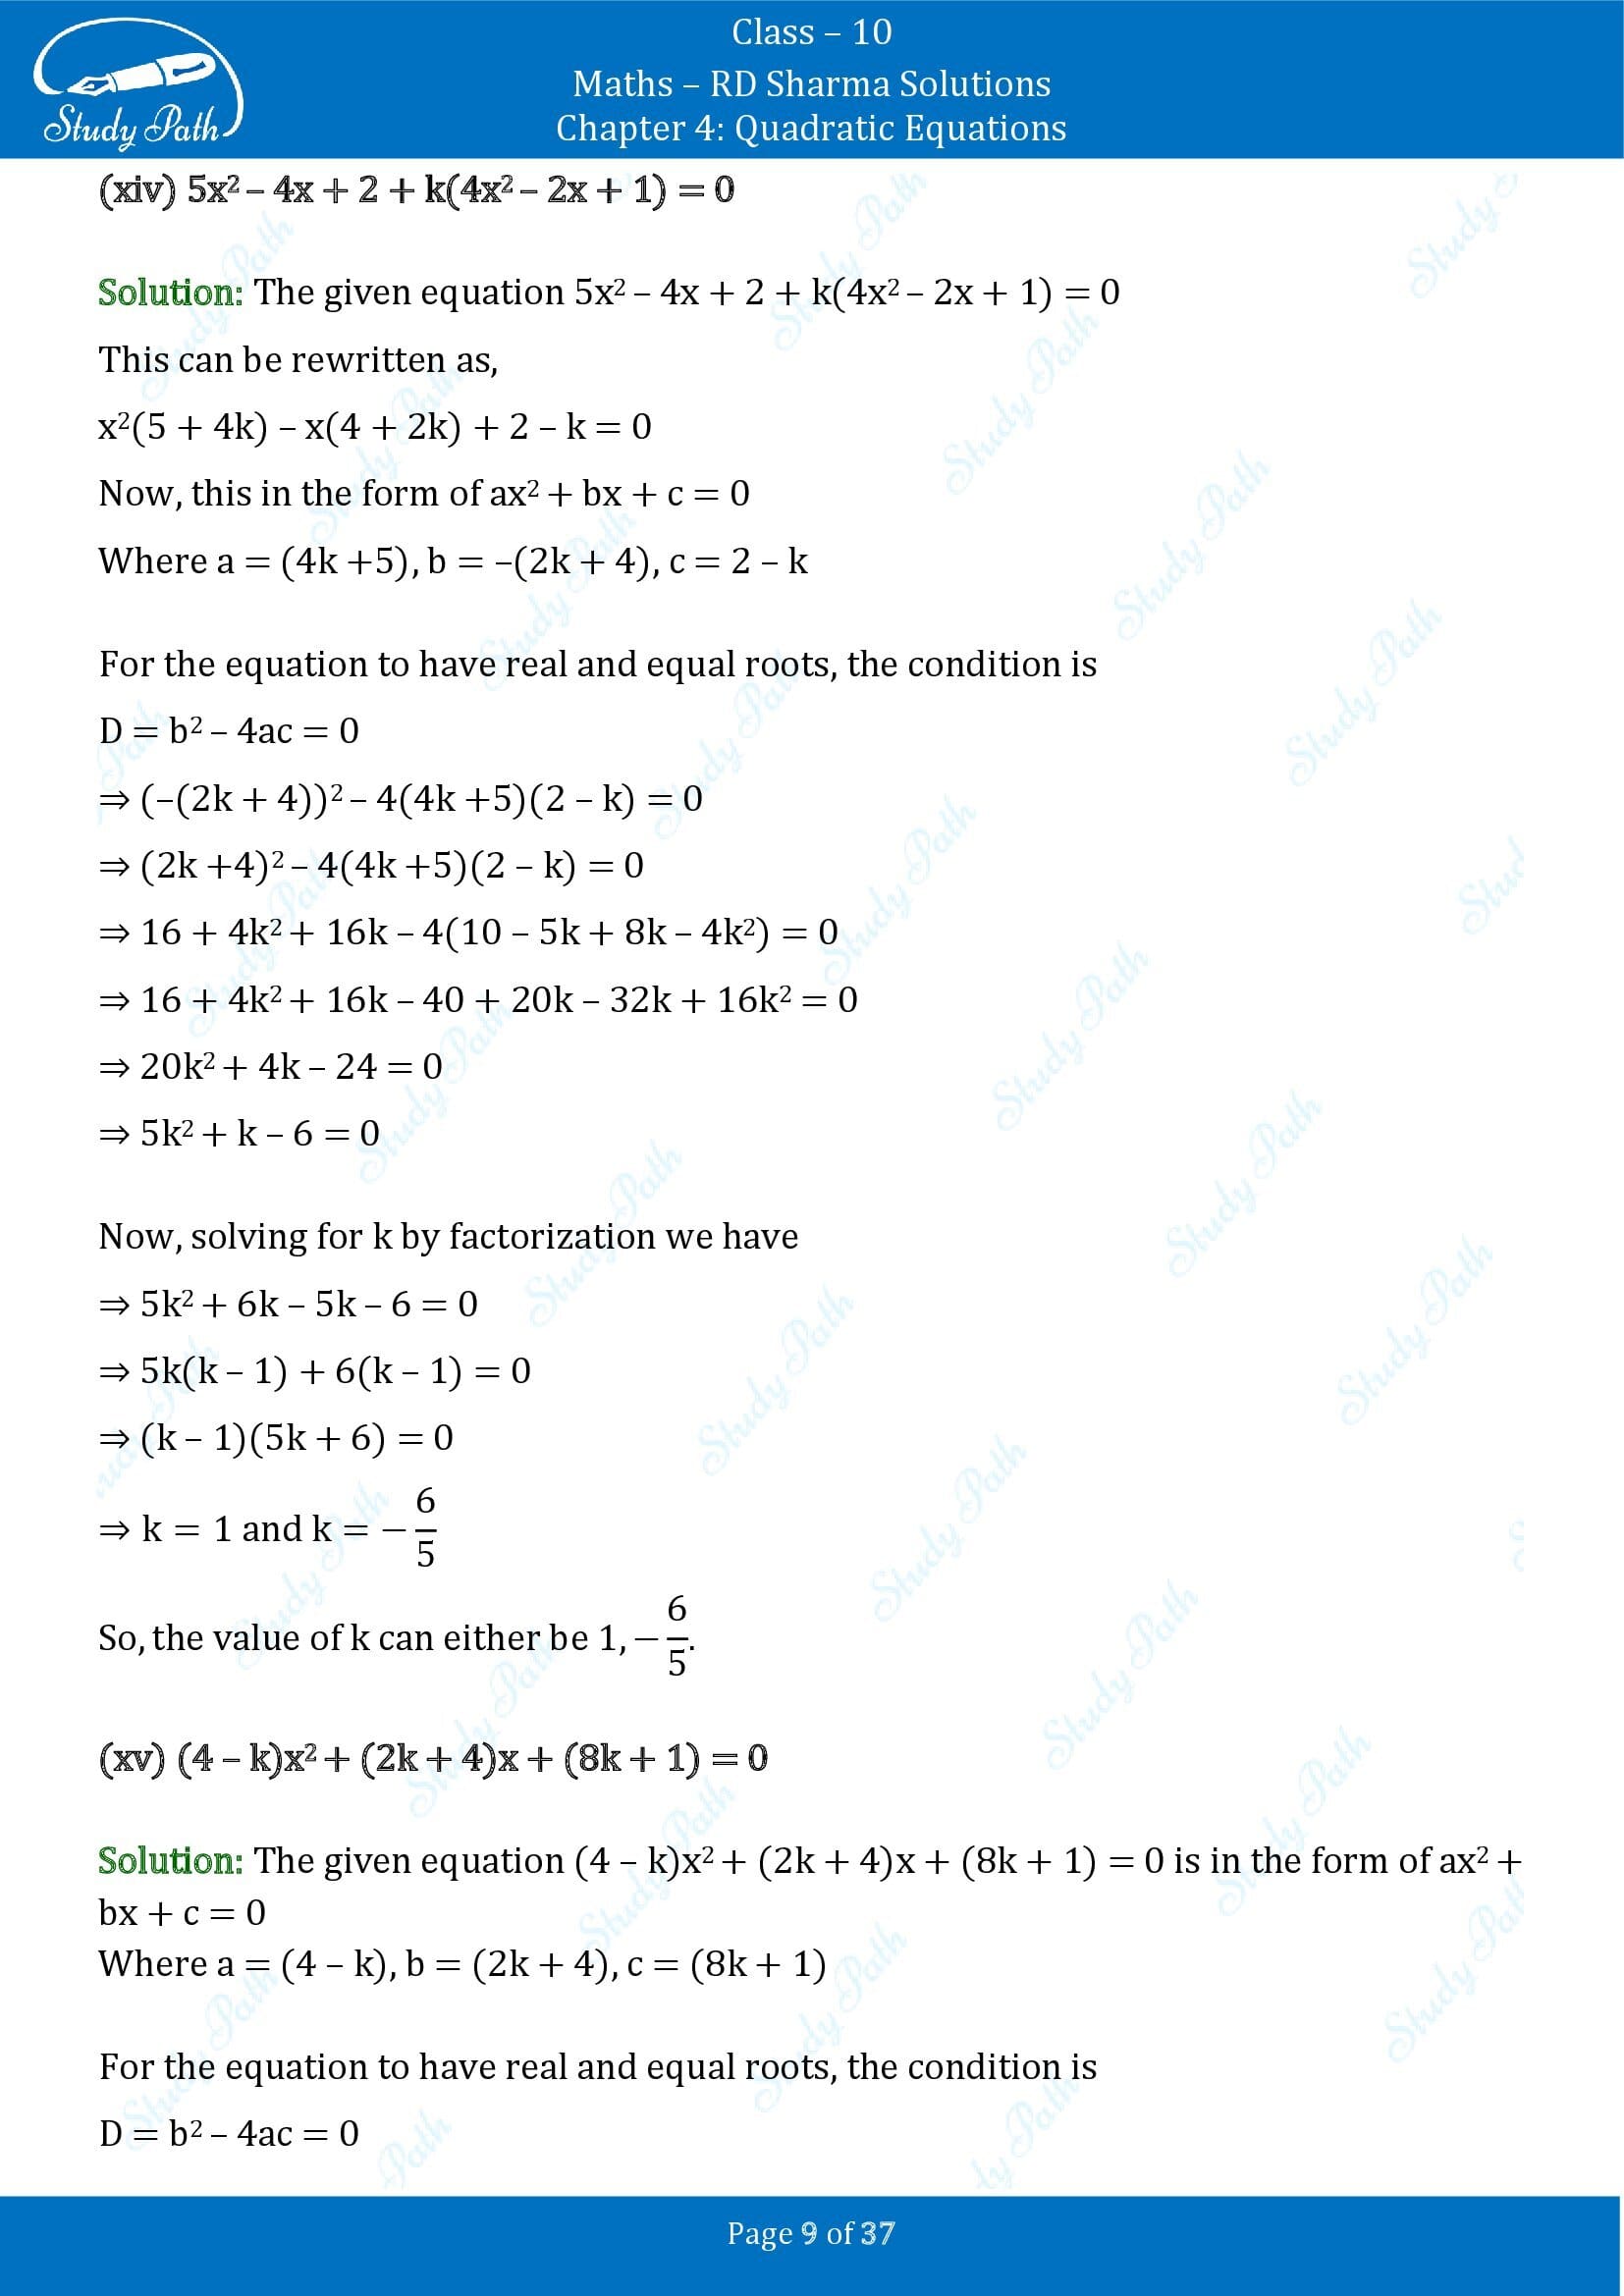 RD Sharma Solutions Class 10 Chapter 4 Quadratic Equations Exercise 4.6 00009